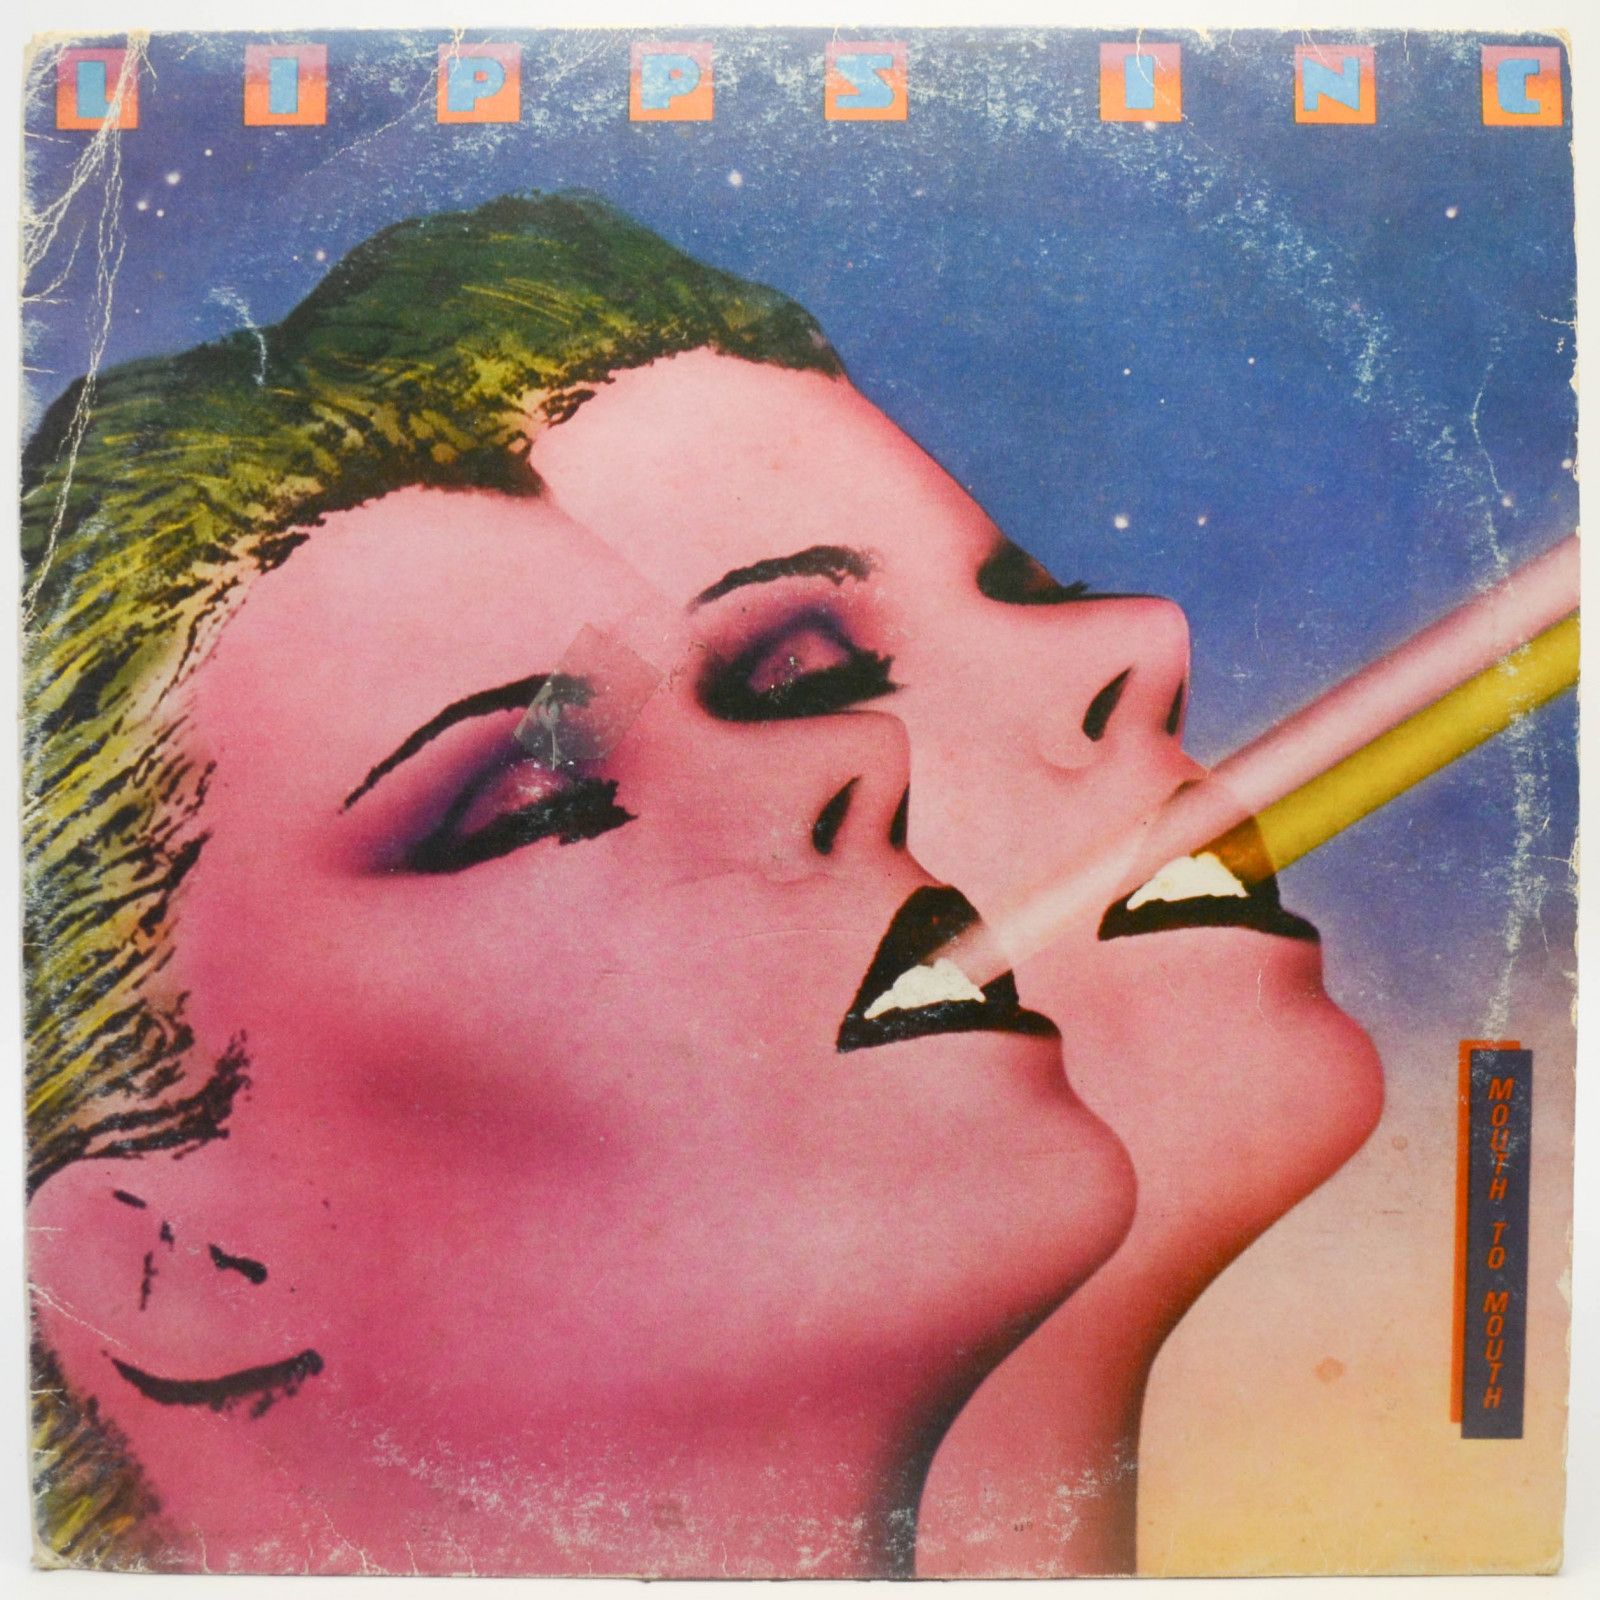 Lipps, Inc. — Mouth To Mouth, 1980